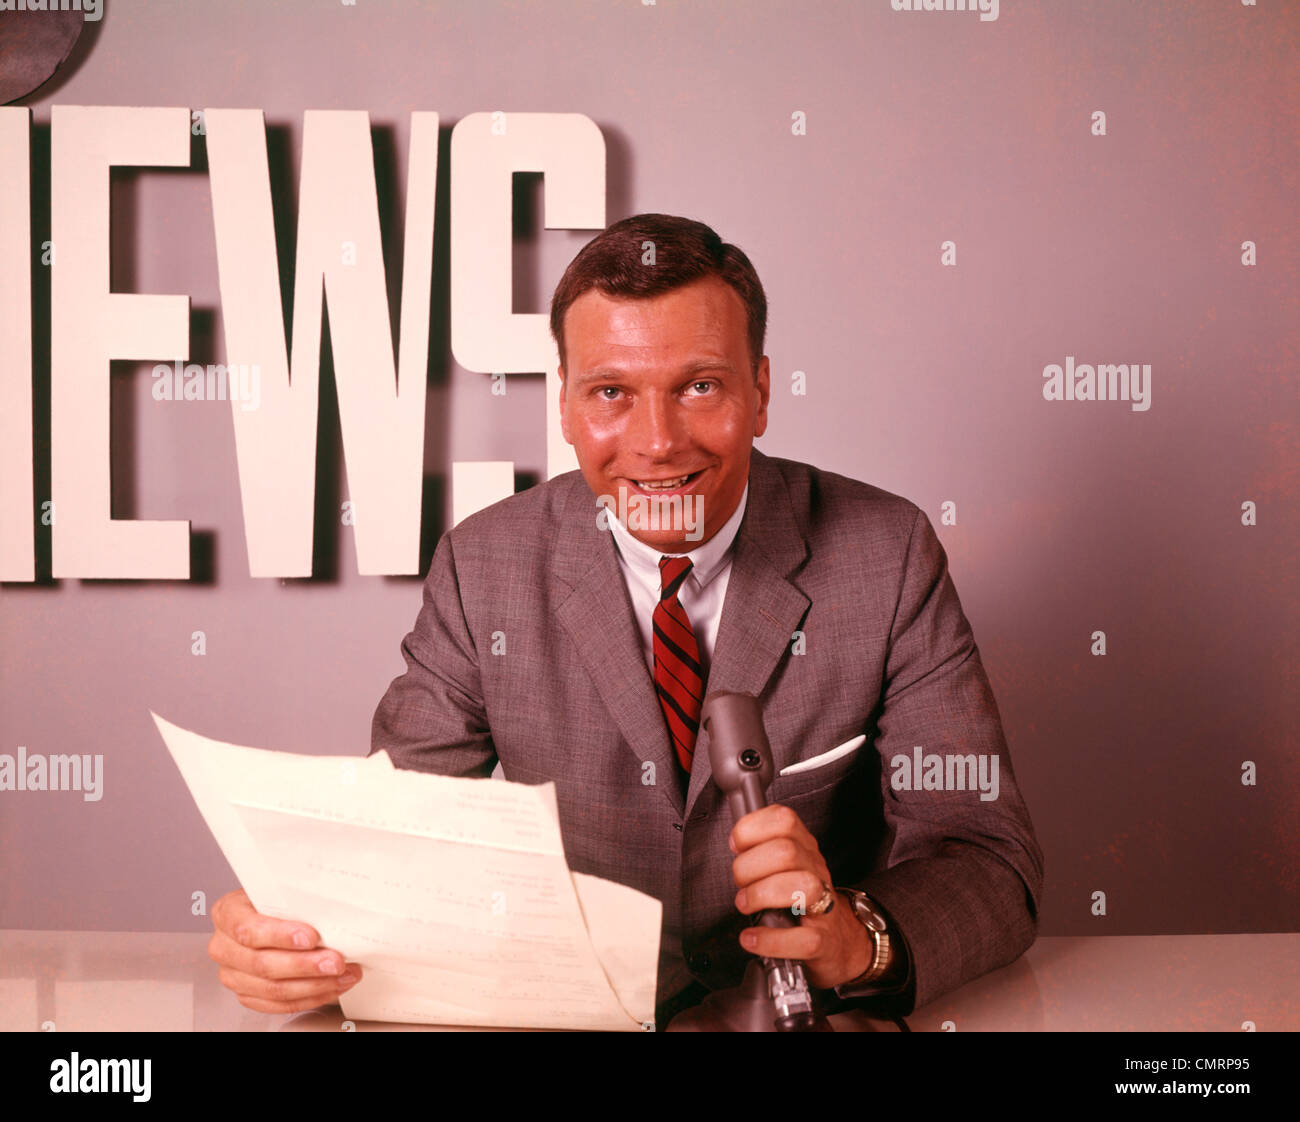 1960 1960s SMILING REPORTER NEWSMAN ANNOUNCER AT NEWS DESK MICROPHONE PAPERS READING REPORT BROADCASTING RETRO Stock Photo